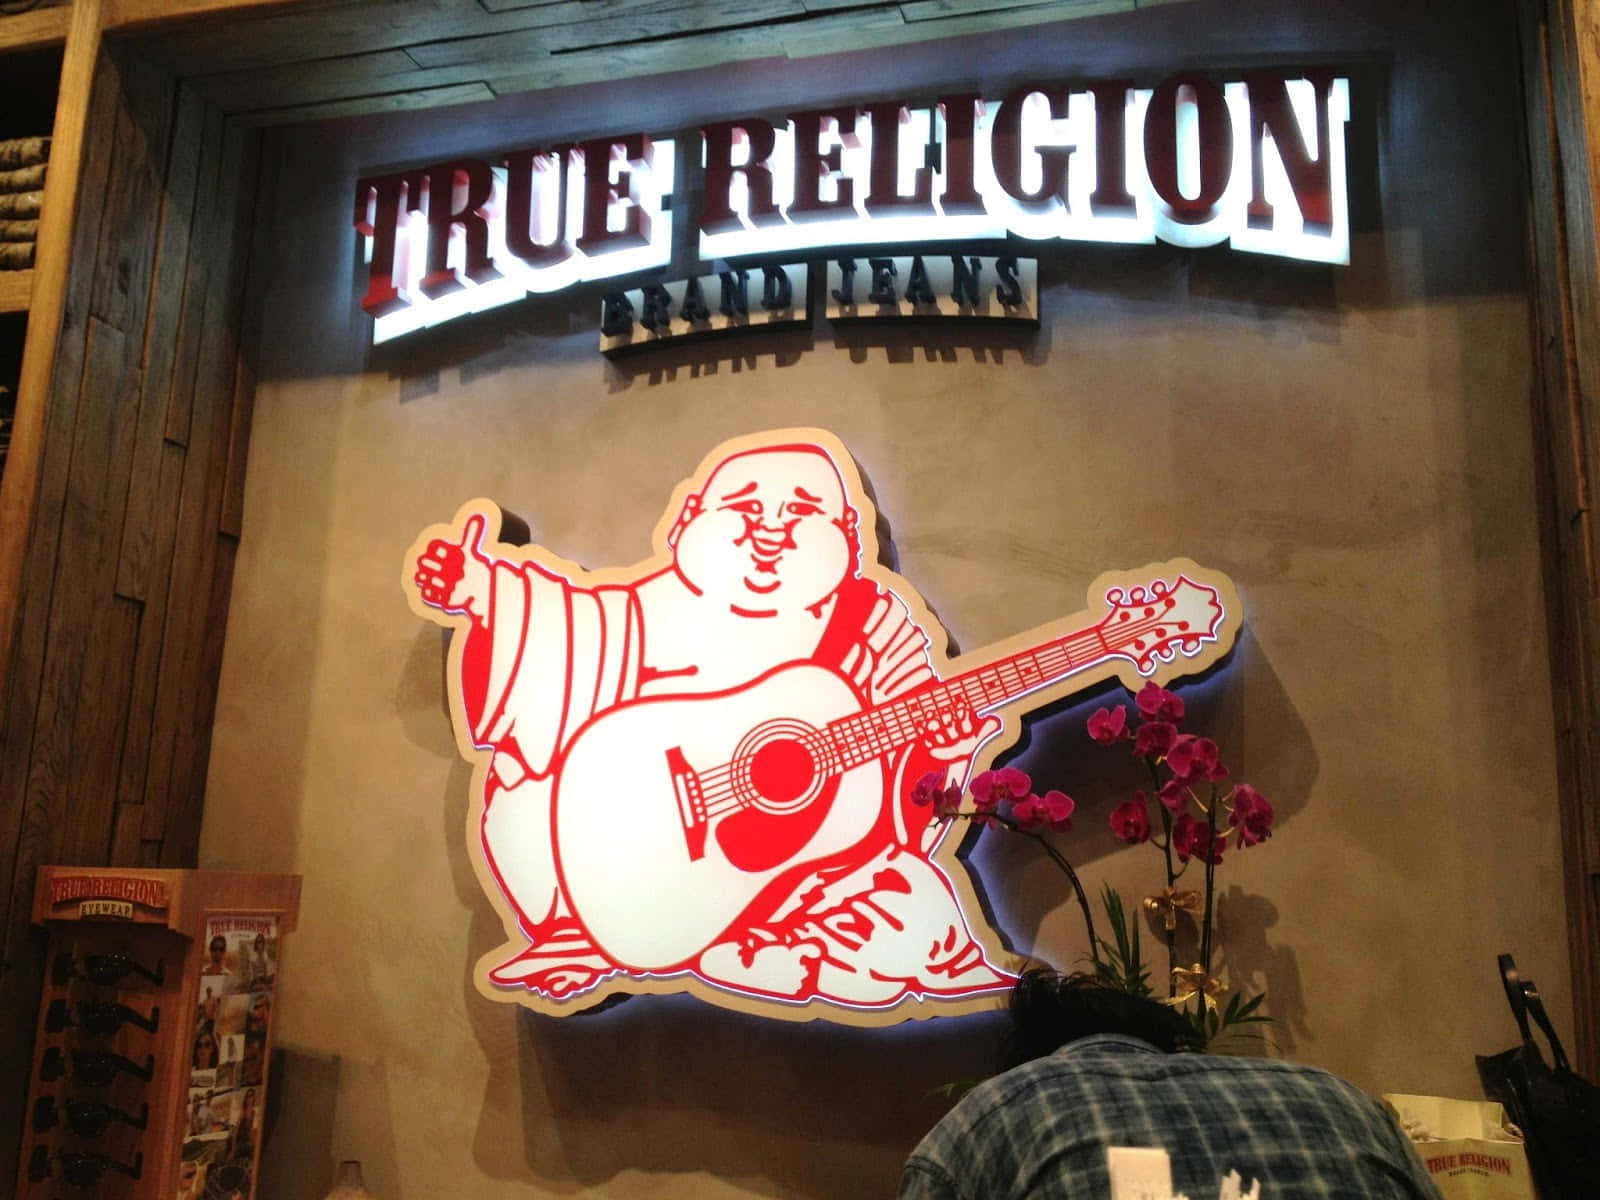 Crafted for the modern individual, True Religion provides timeless and stylish apparel. Wallpaper